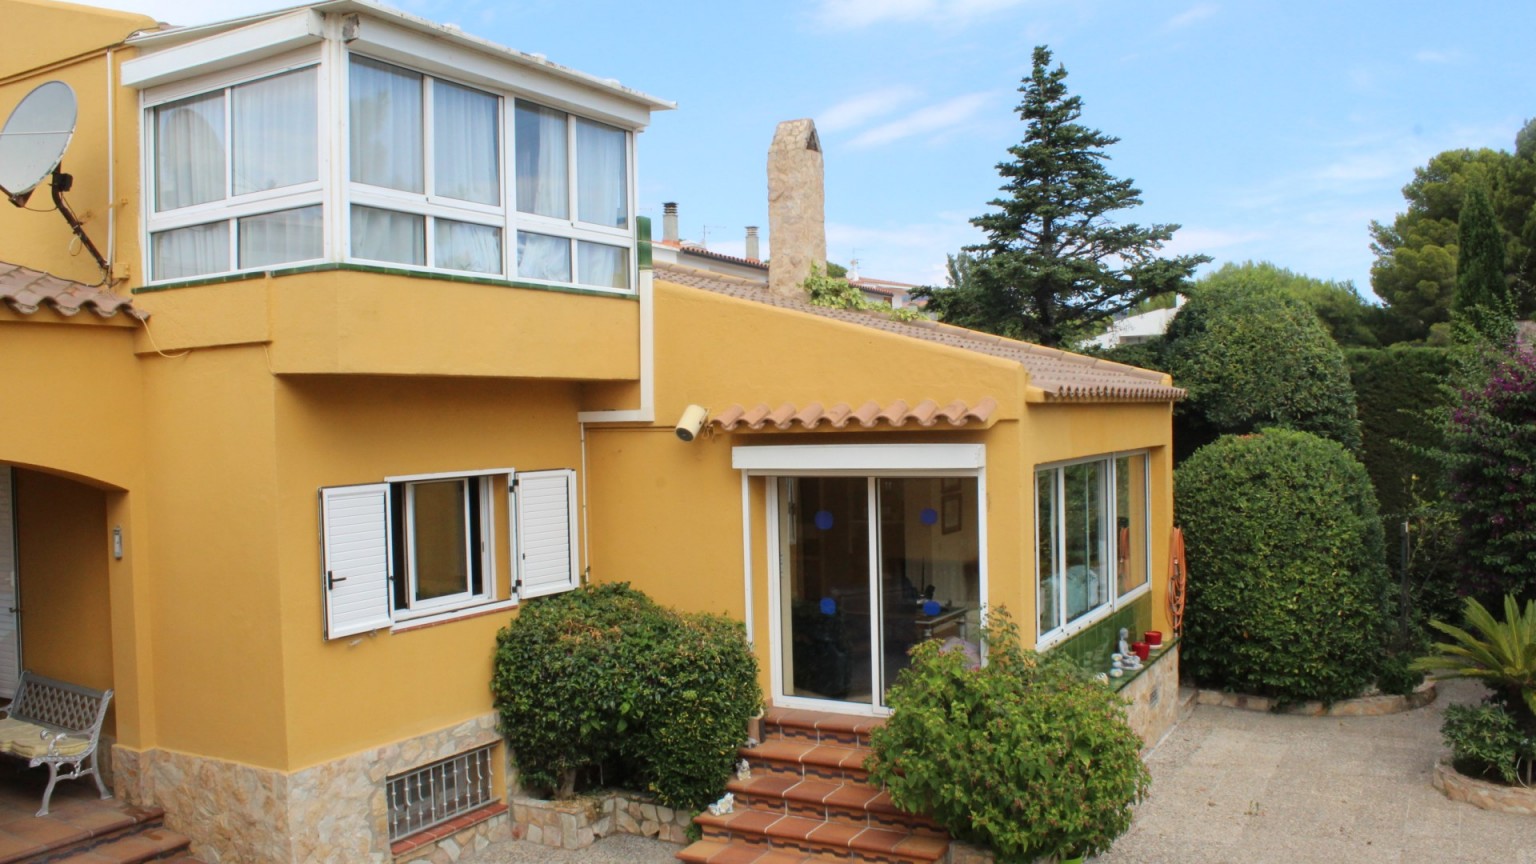 For sale fantastics communicated by a corridor houses in els Estanys area